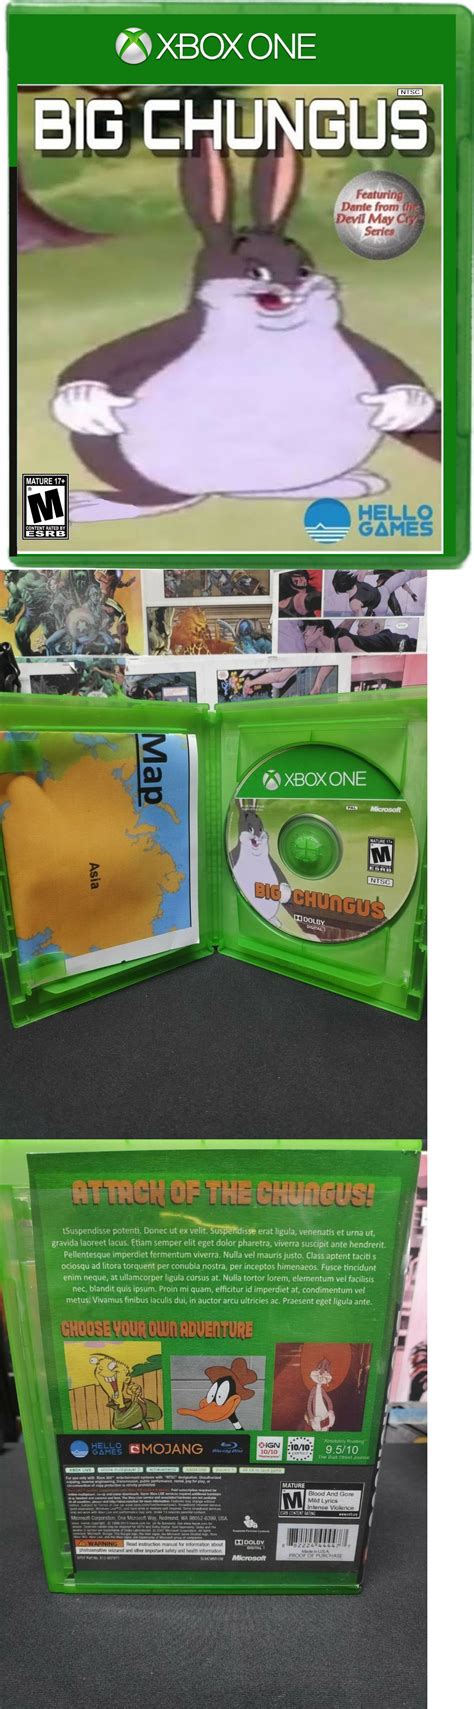 Manuals Inserts And Box Art 182174 Big Chungus Xbox One Case With Disk